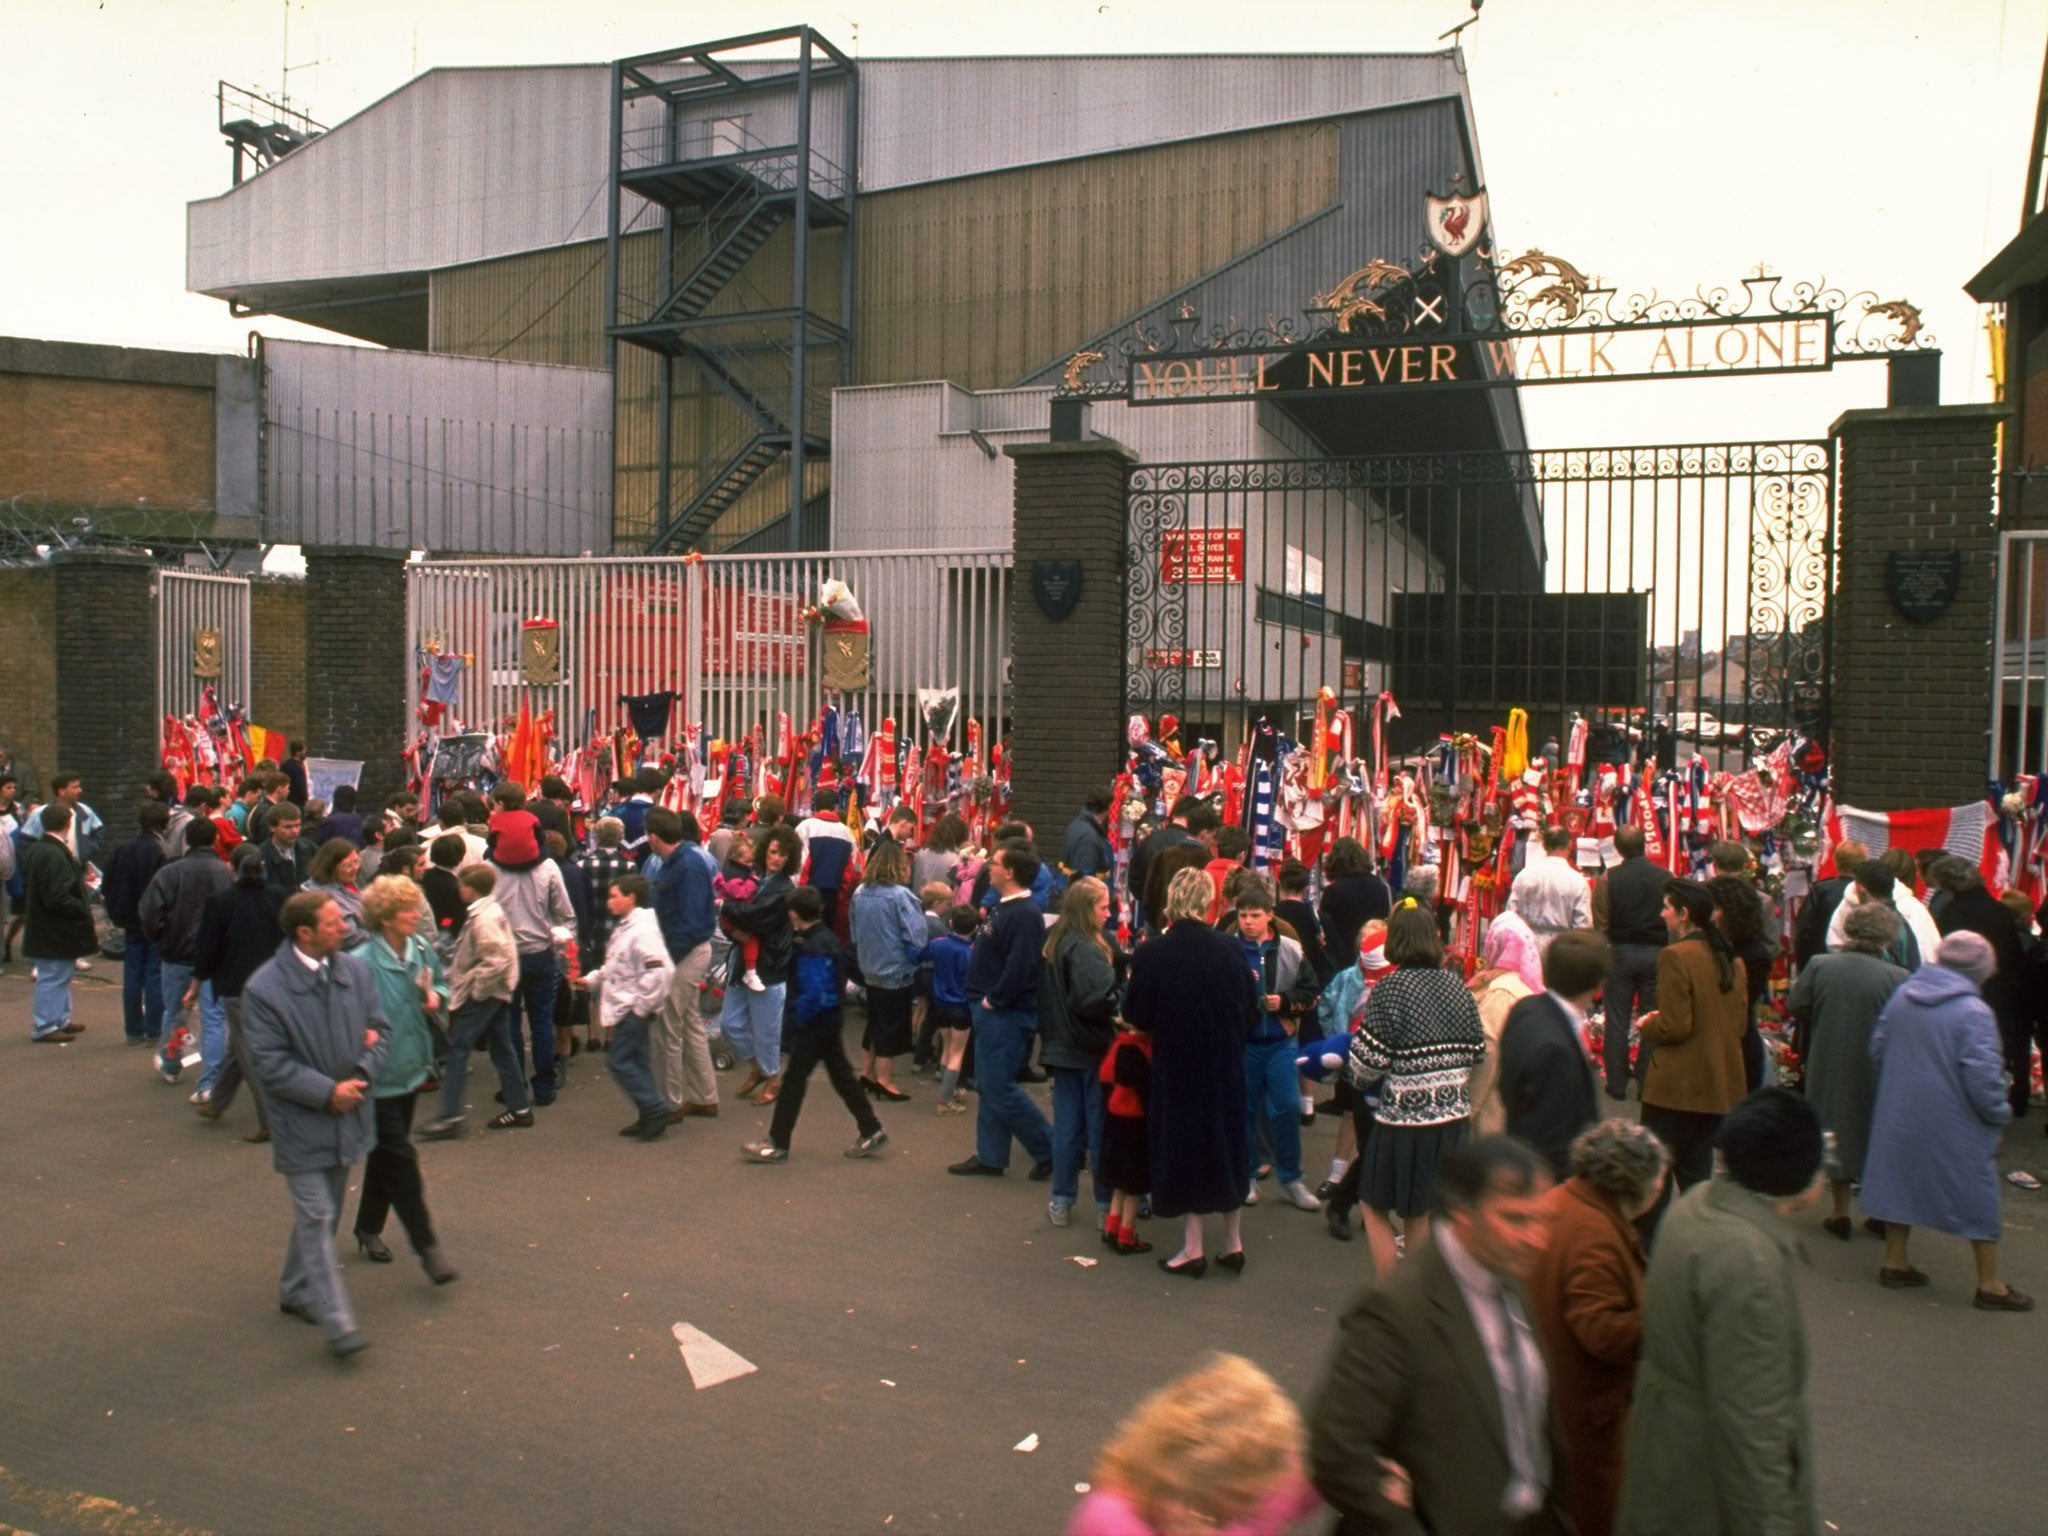 Supporters pay their respects after the Hillsborough disaster